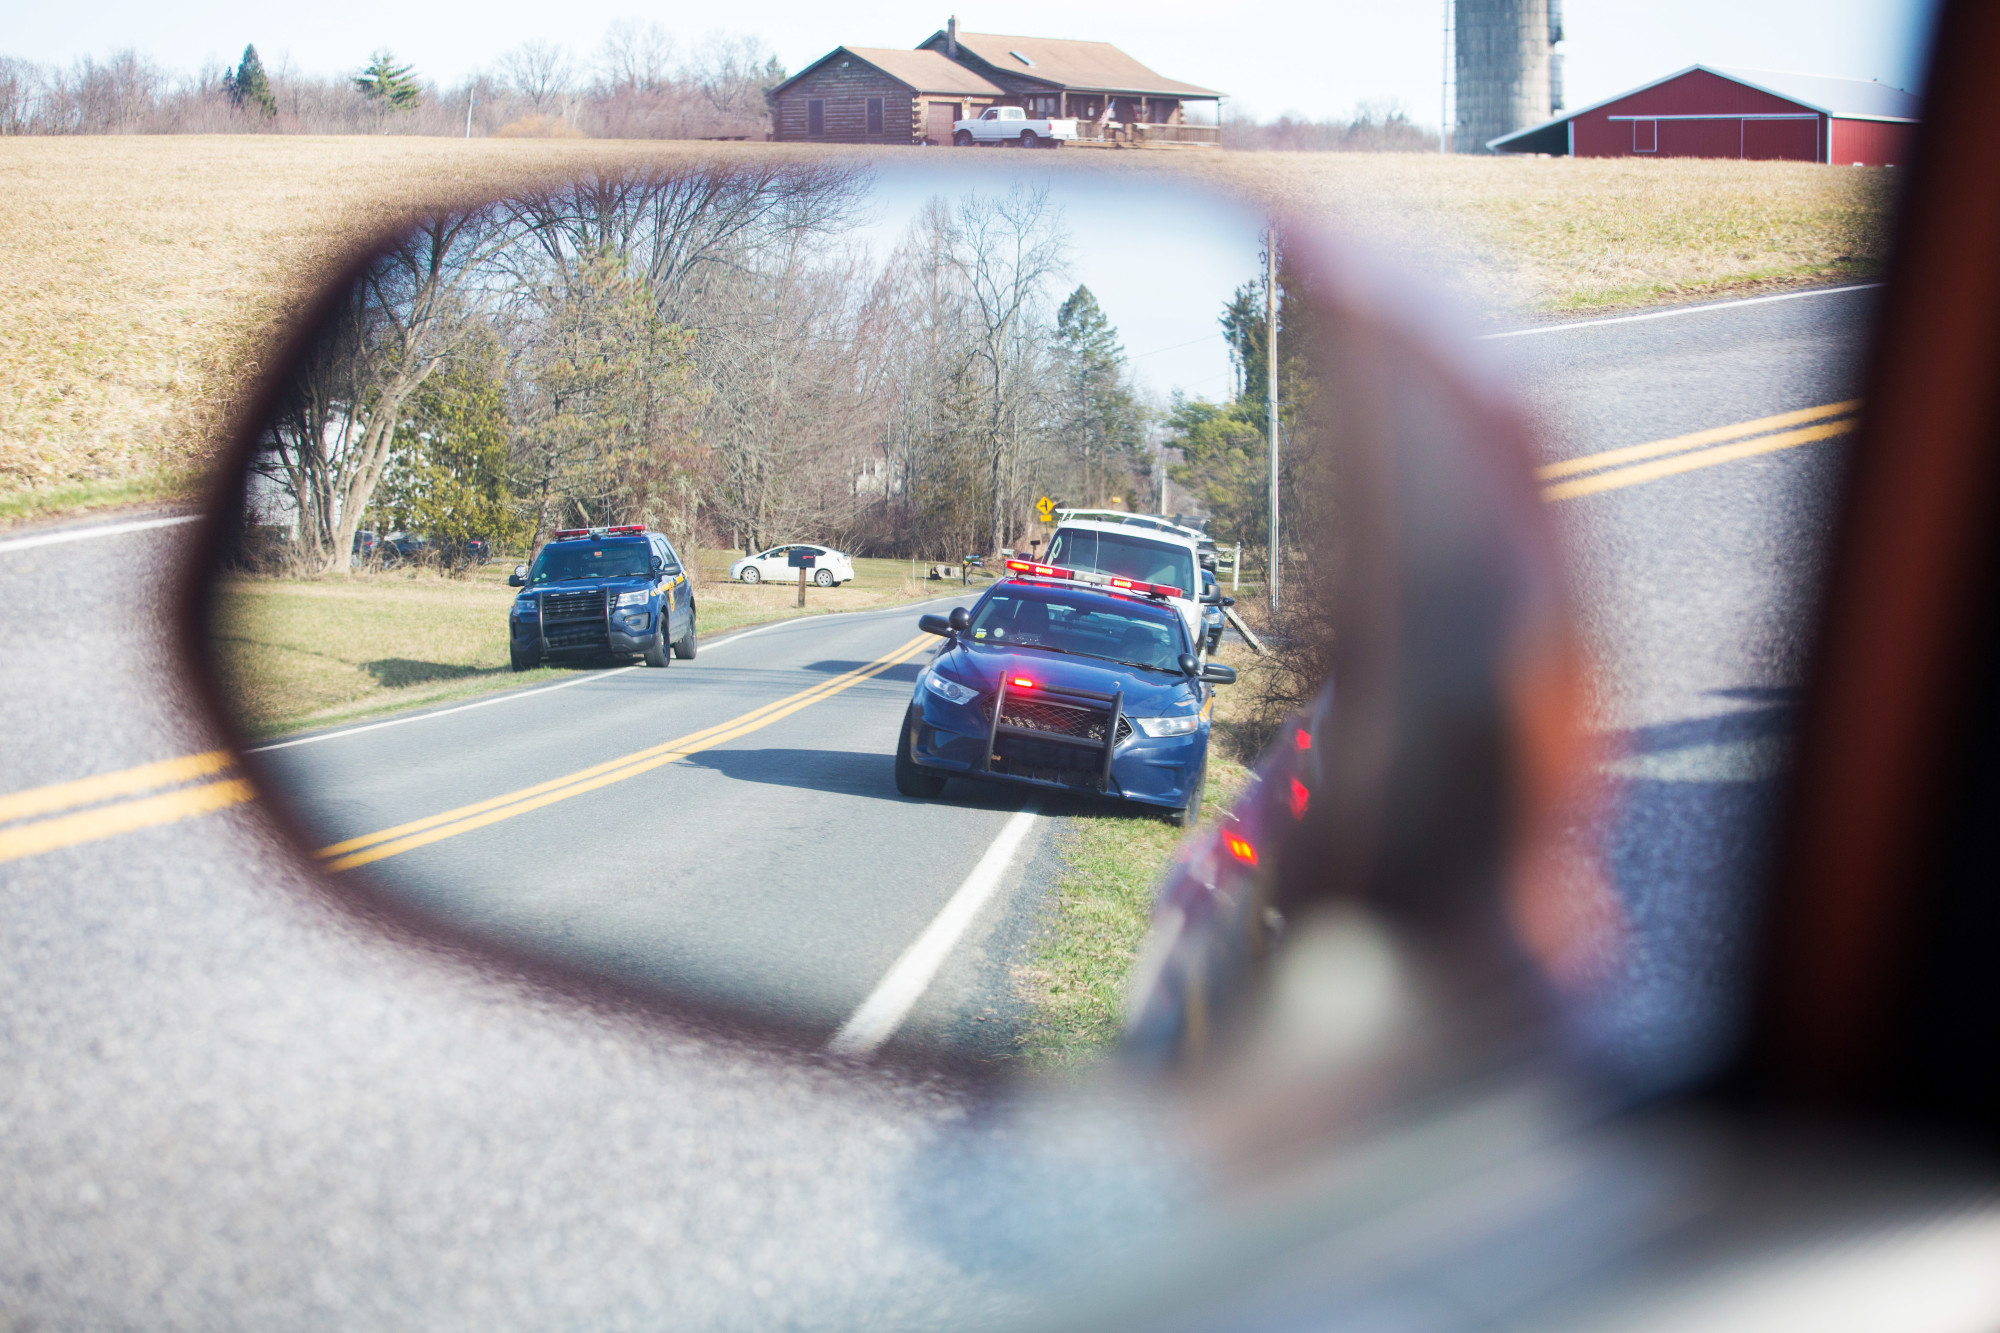 If you get pulled over for speeding, you need to first remain calm. This guide will walk you through what to do if you get a speeding ticket.